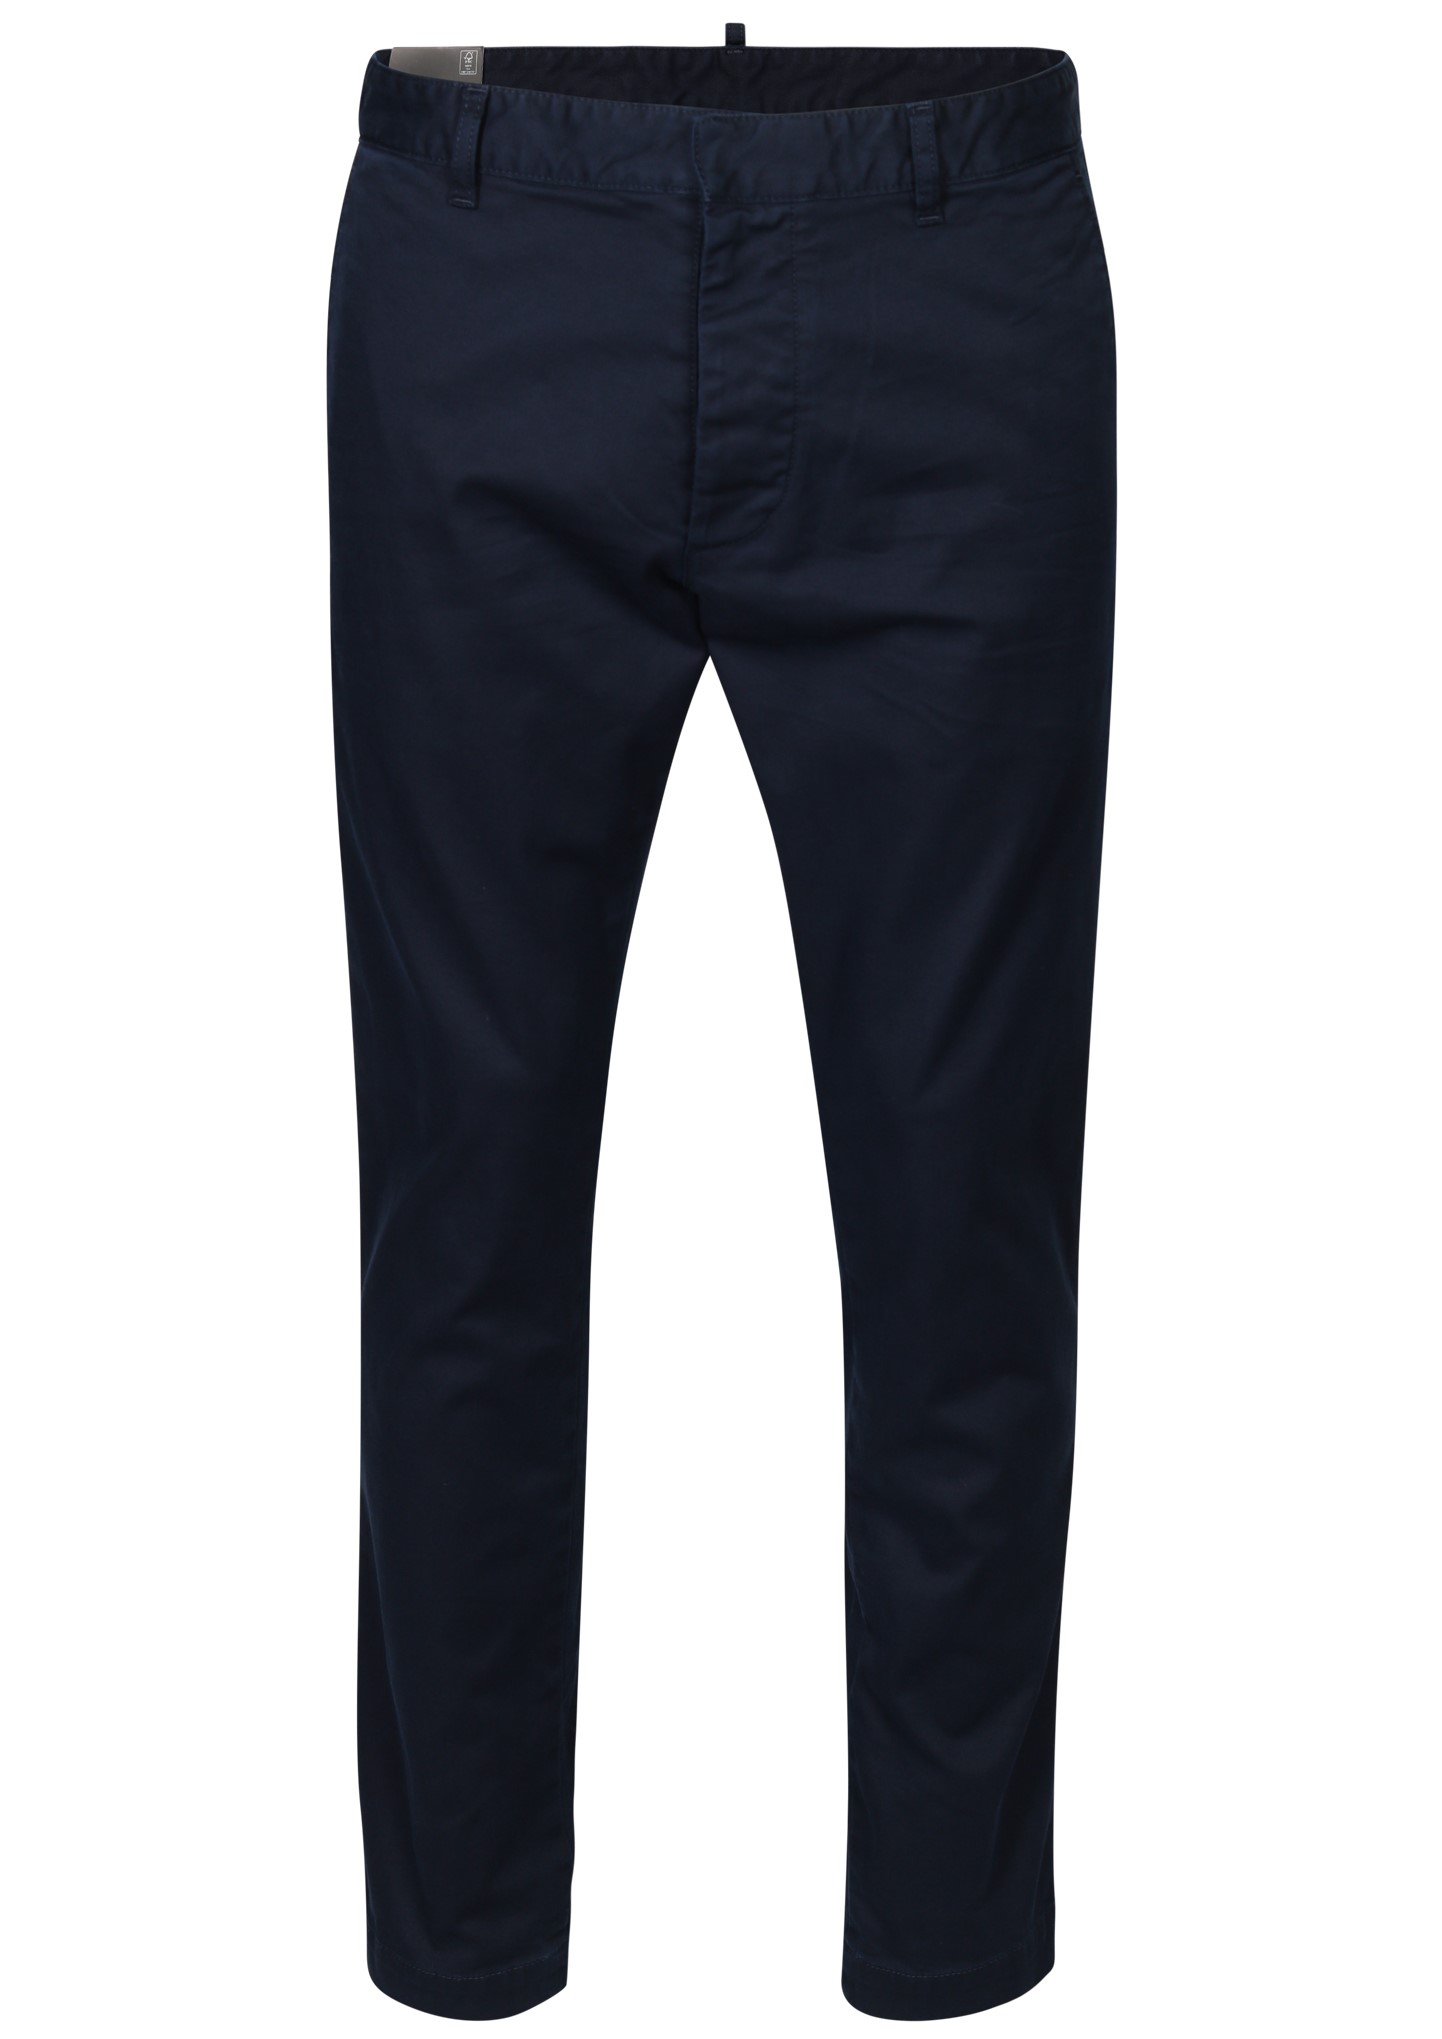 DSQUARED2 Cool Guy Chino Pant in Navy 56